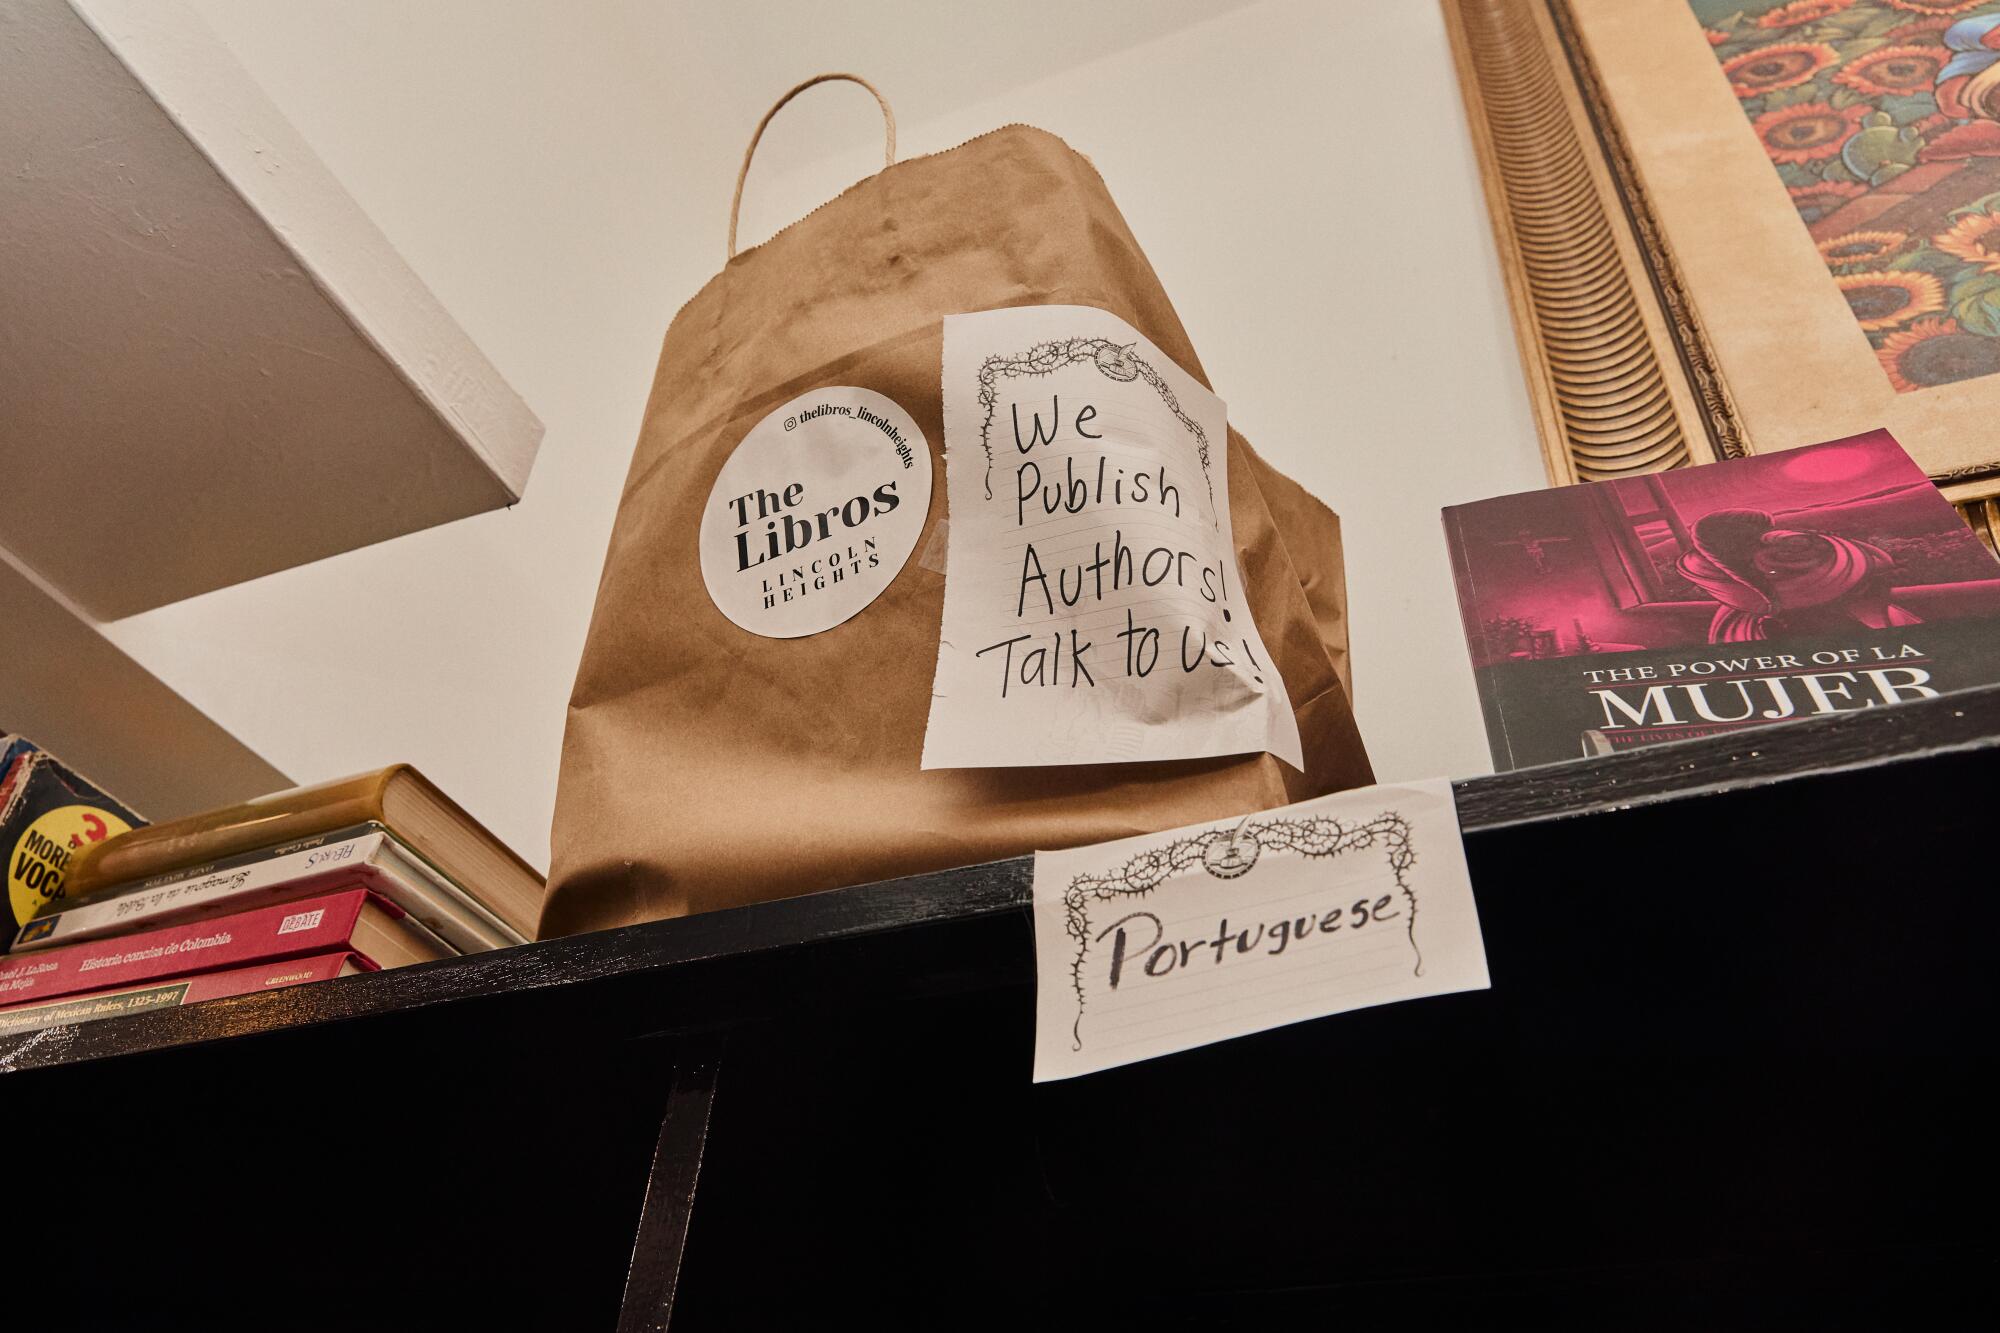 A paper bag with a sign that says "We publish authors, talk to us" It is located on top of a shelf in the Libros bookstore.